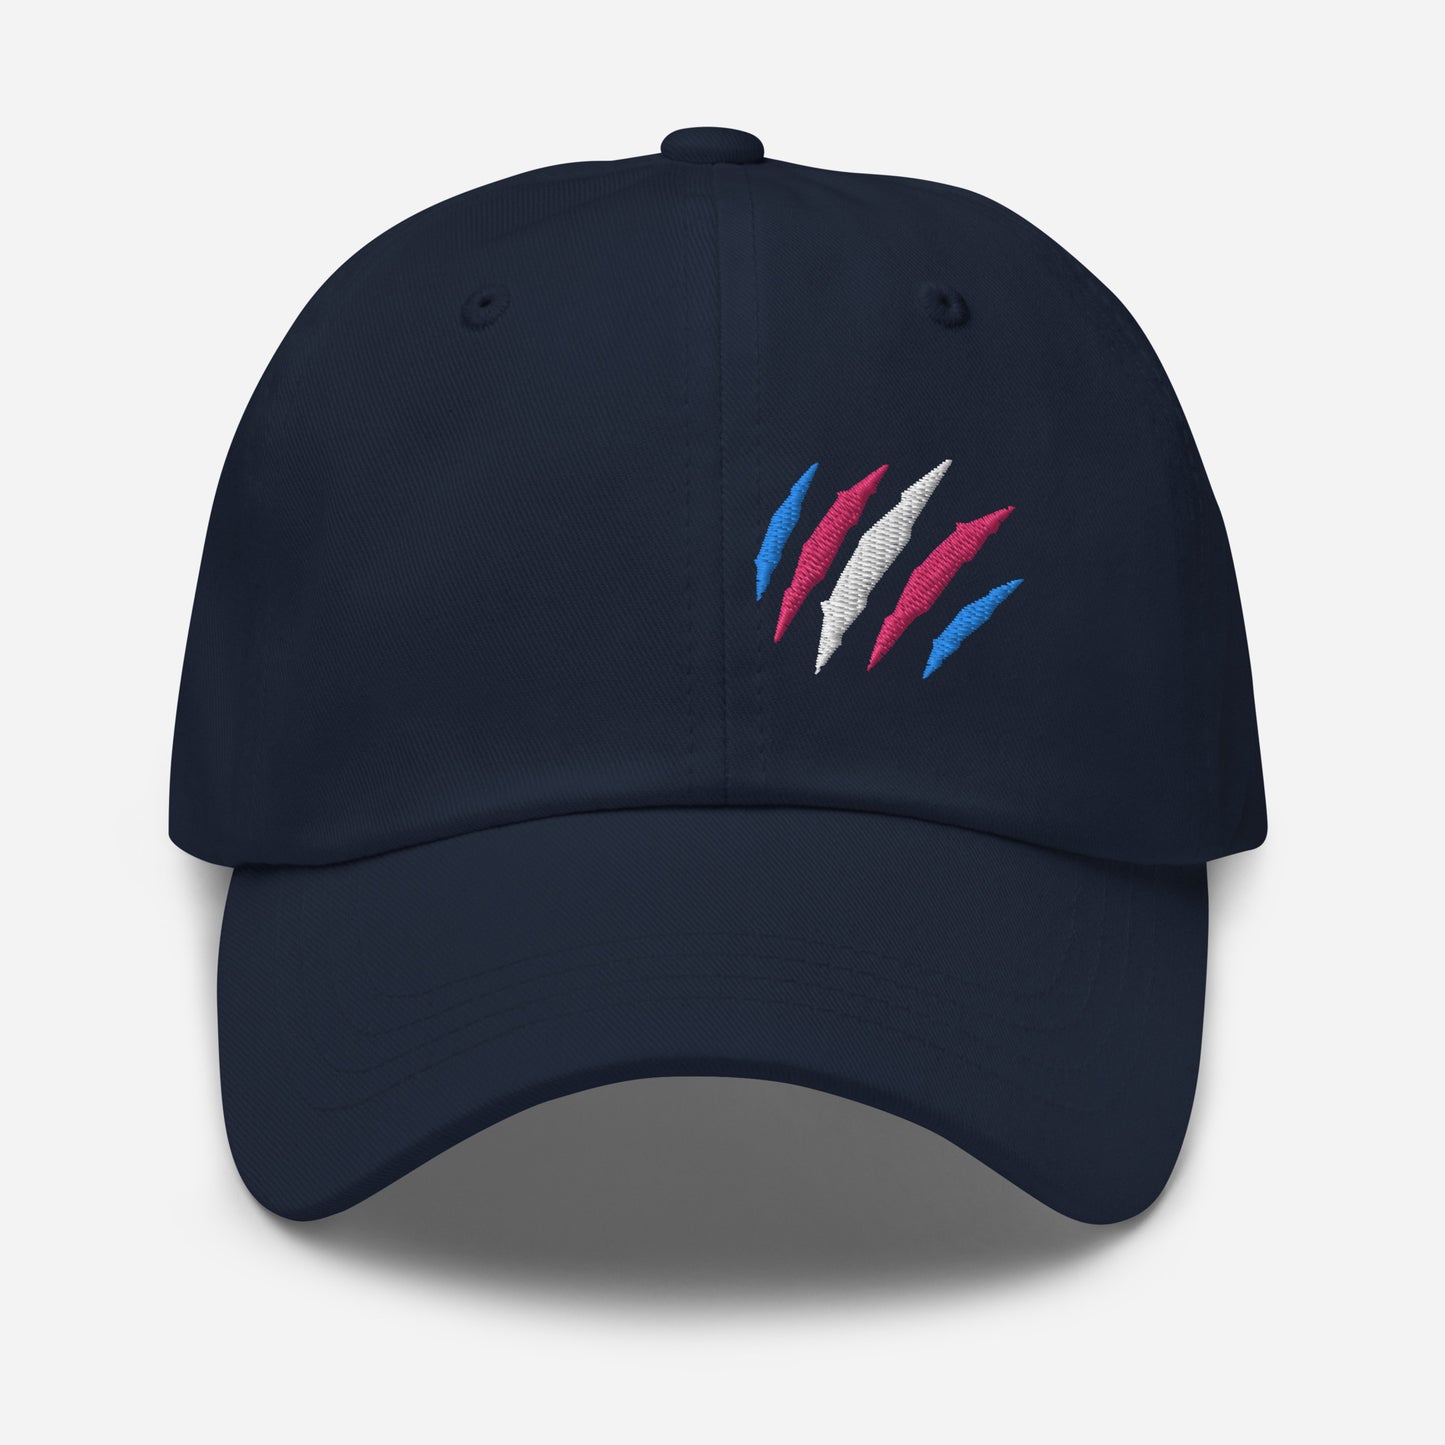 Navy baseball hat featuring transgender pride scratch mark embroidery with a low profile, adjustable strap.